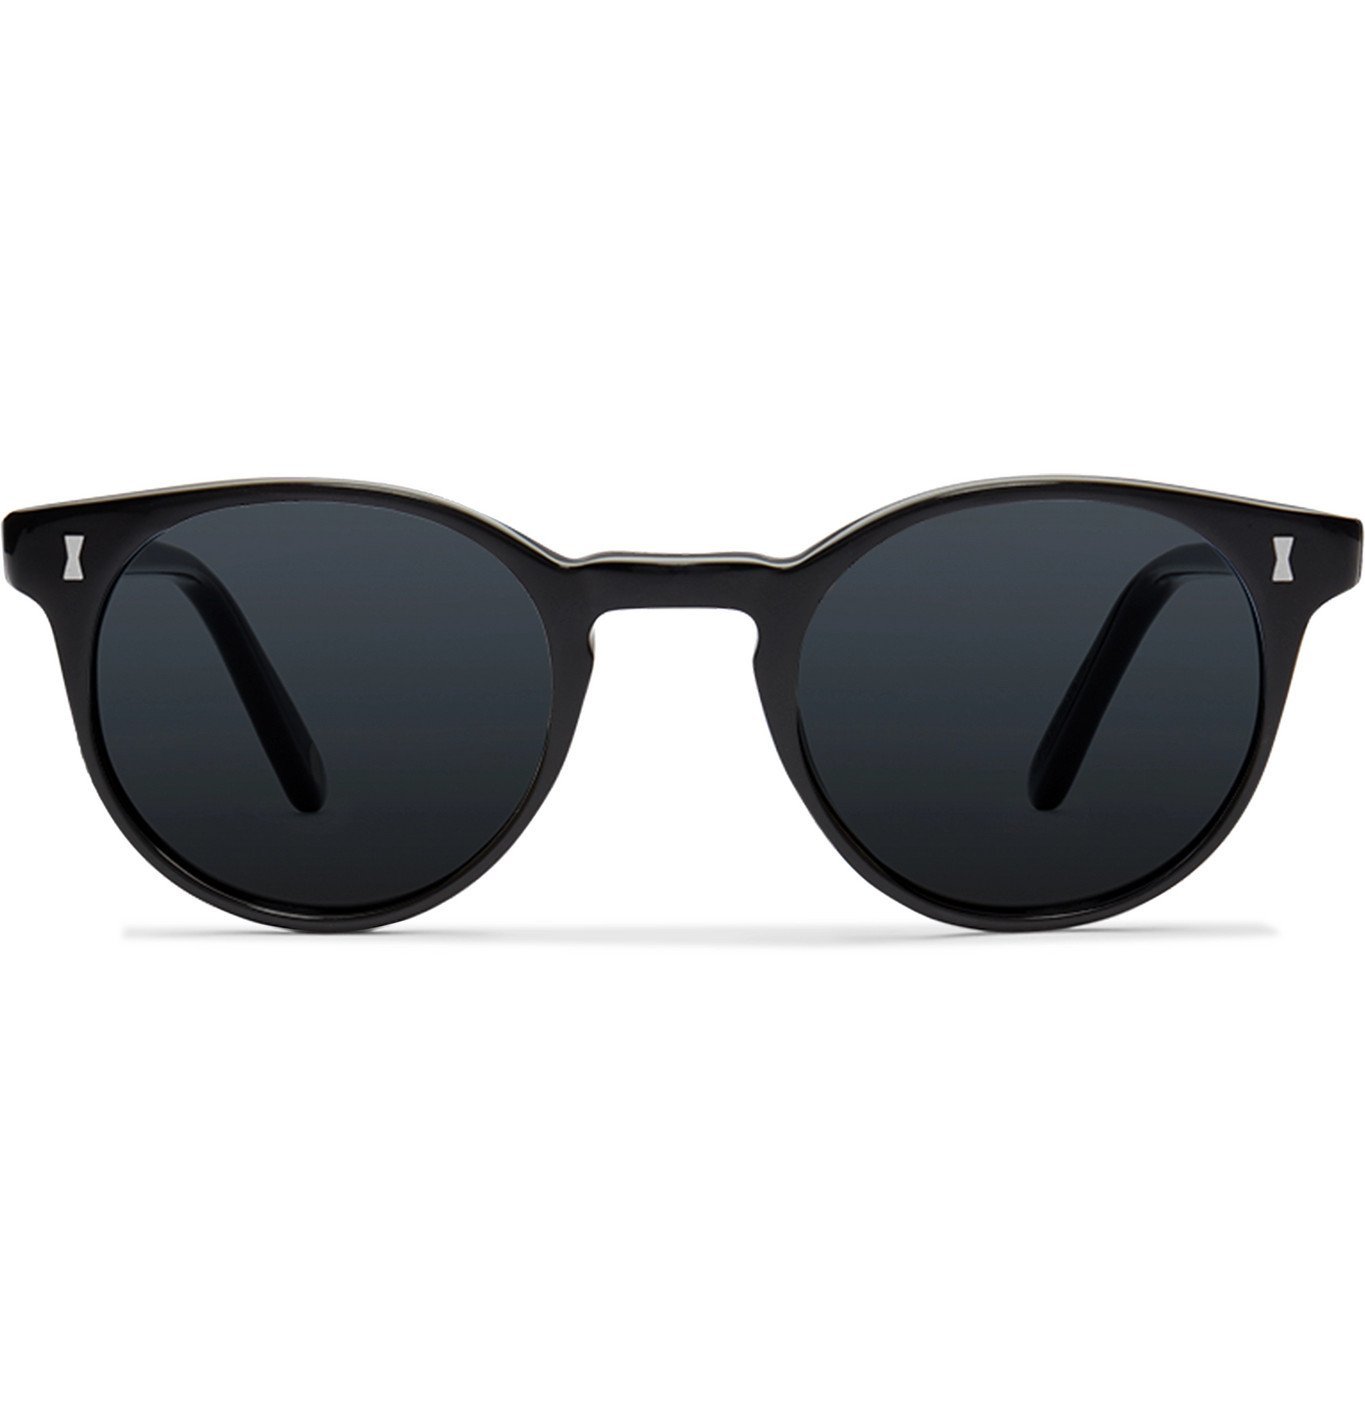 Cubitts - Herbrand Round-Frame Acetate Sunglasses - Black Cubitts